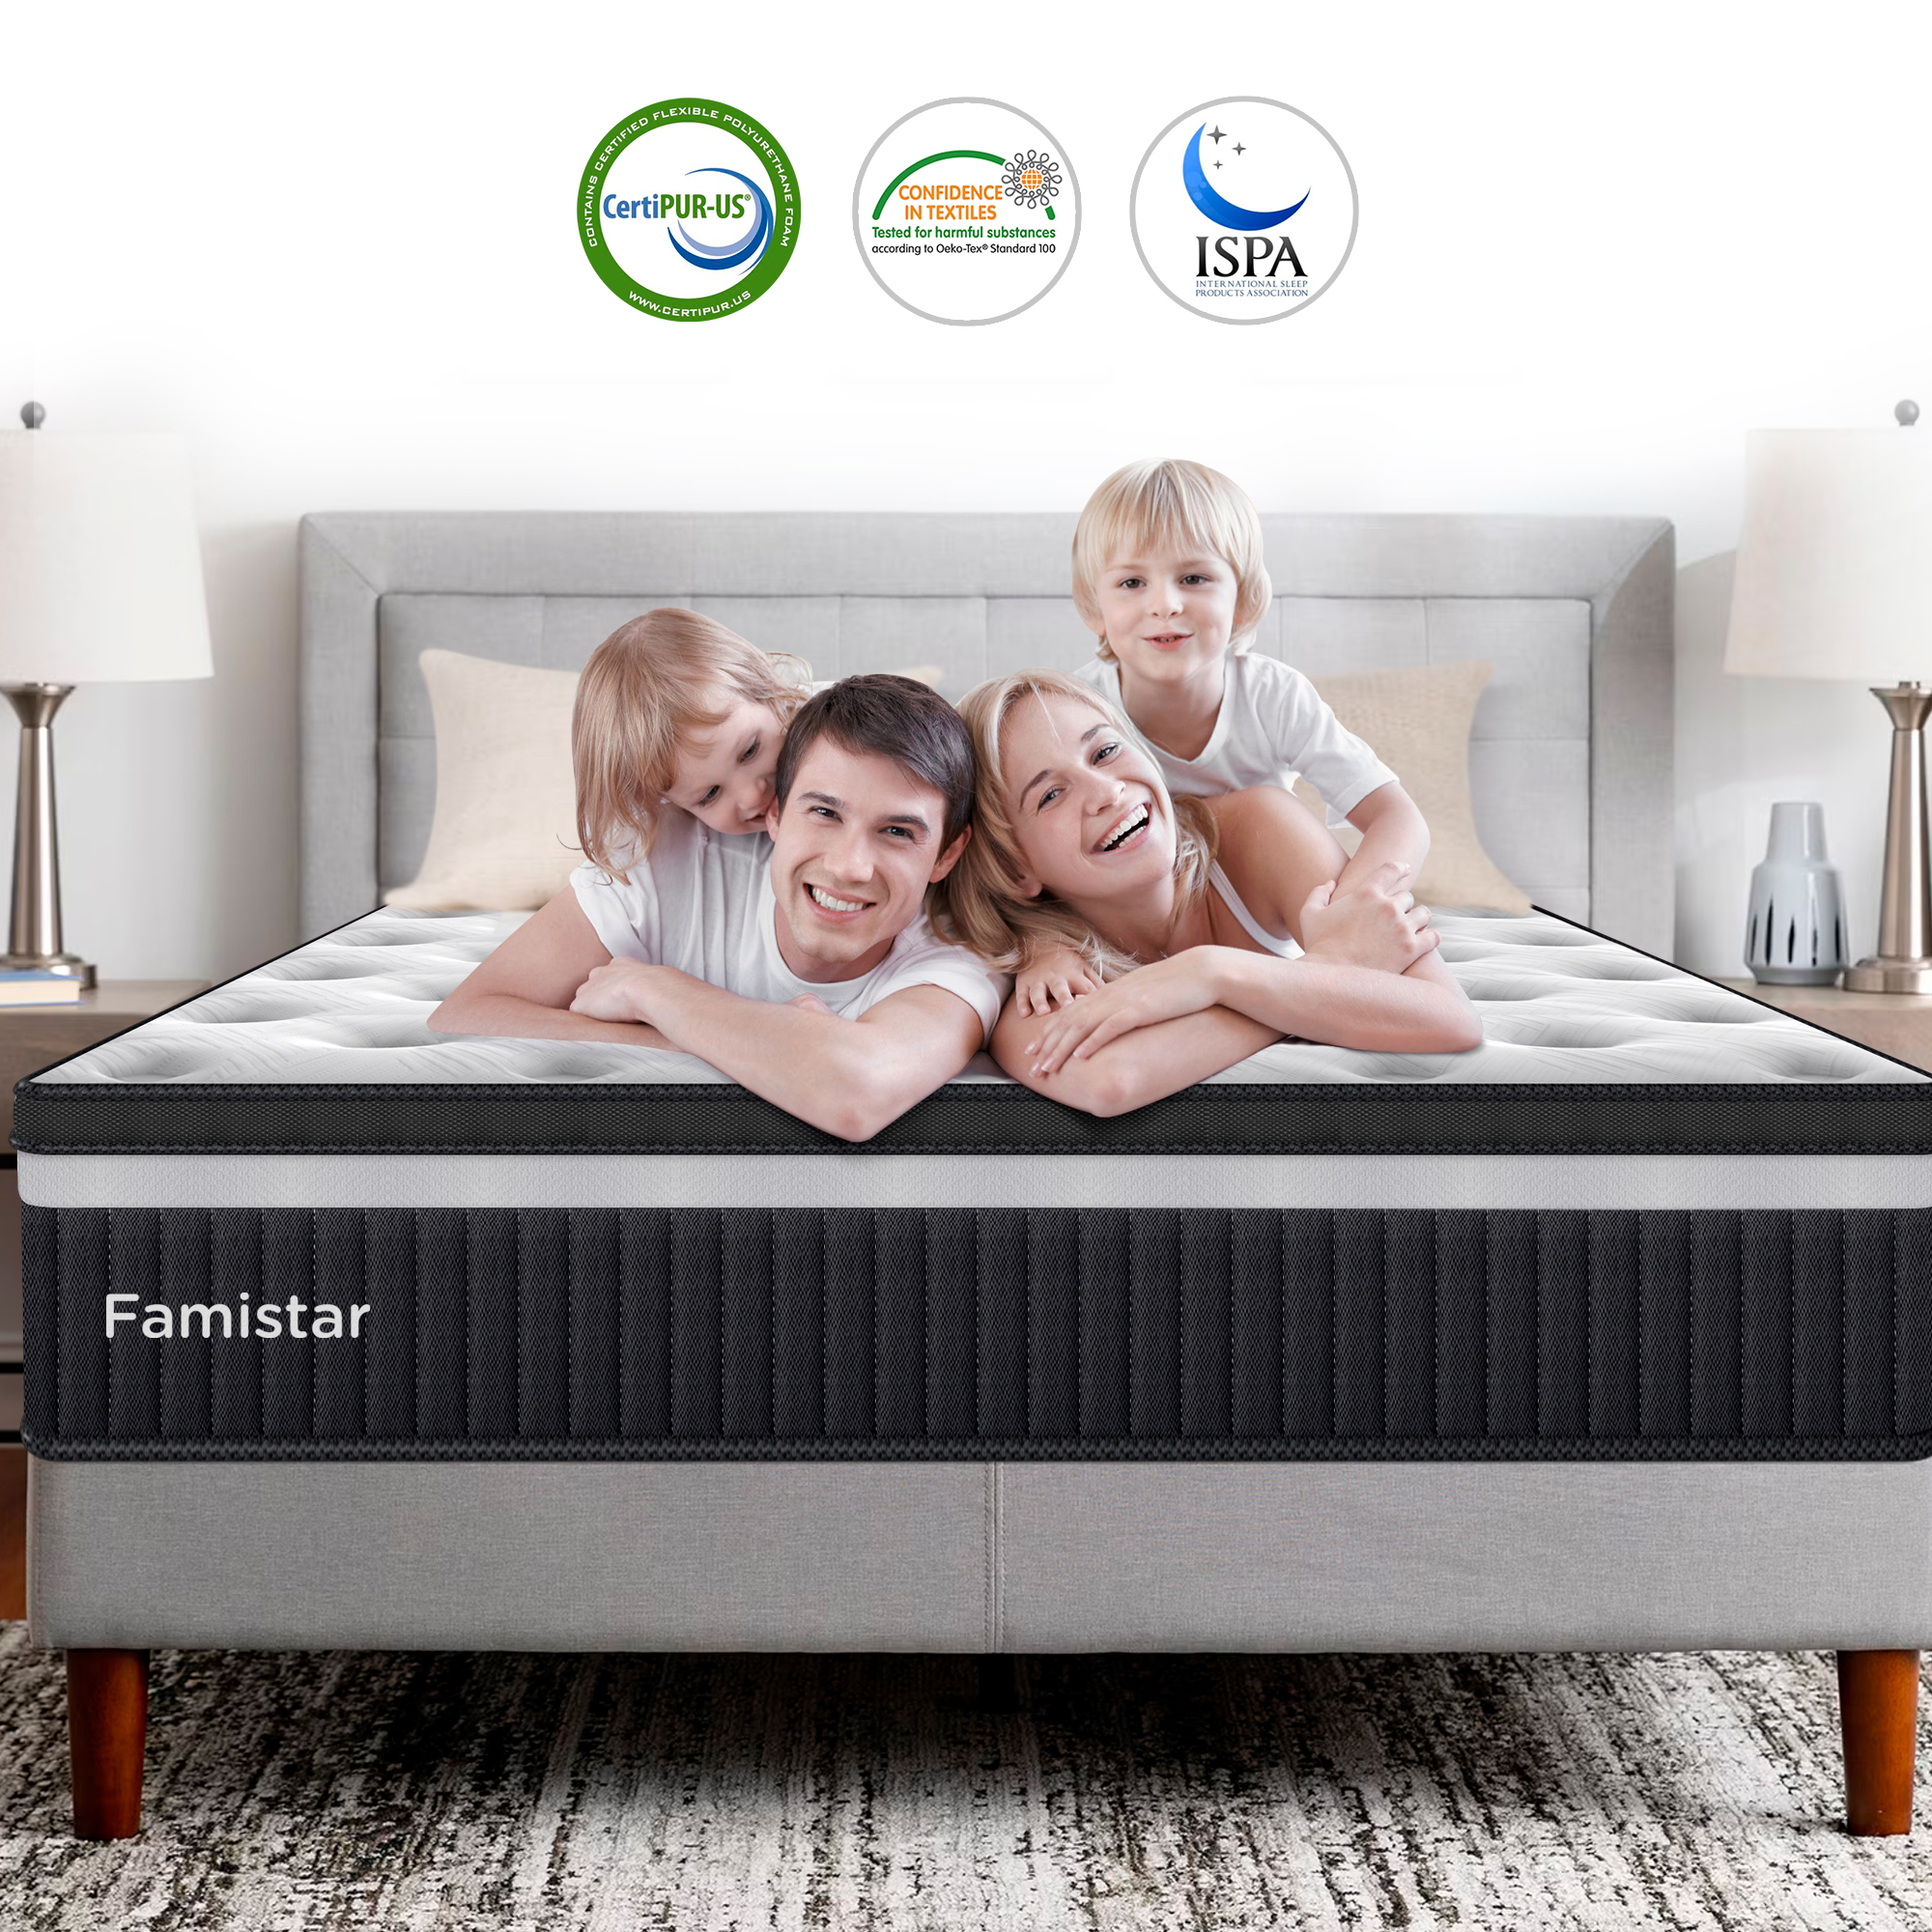 King Mattress, Famistar 13 Inch Memory Foam Mattress King Size, Innerspring Hybrid King Bed Mattress in a Box Medium Firm with Motion Isolation & Strong Support & Pressure Relief, CertiPUR-US - image 1 of 13